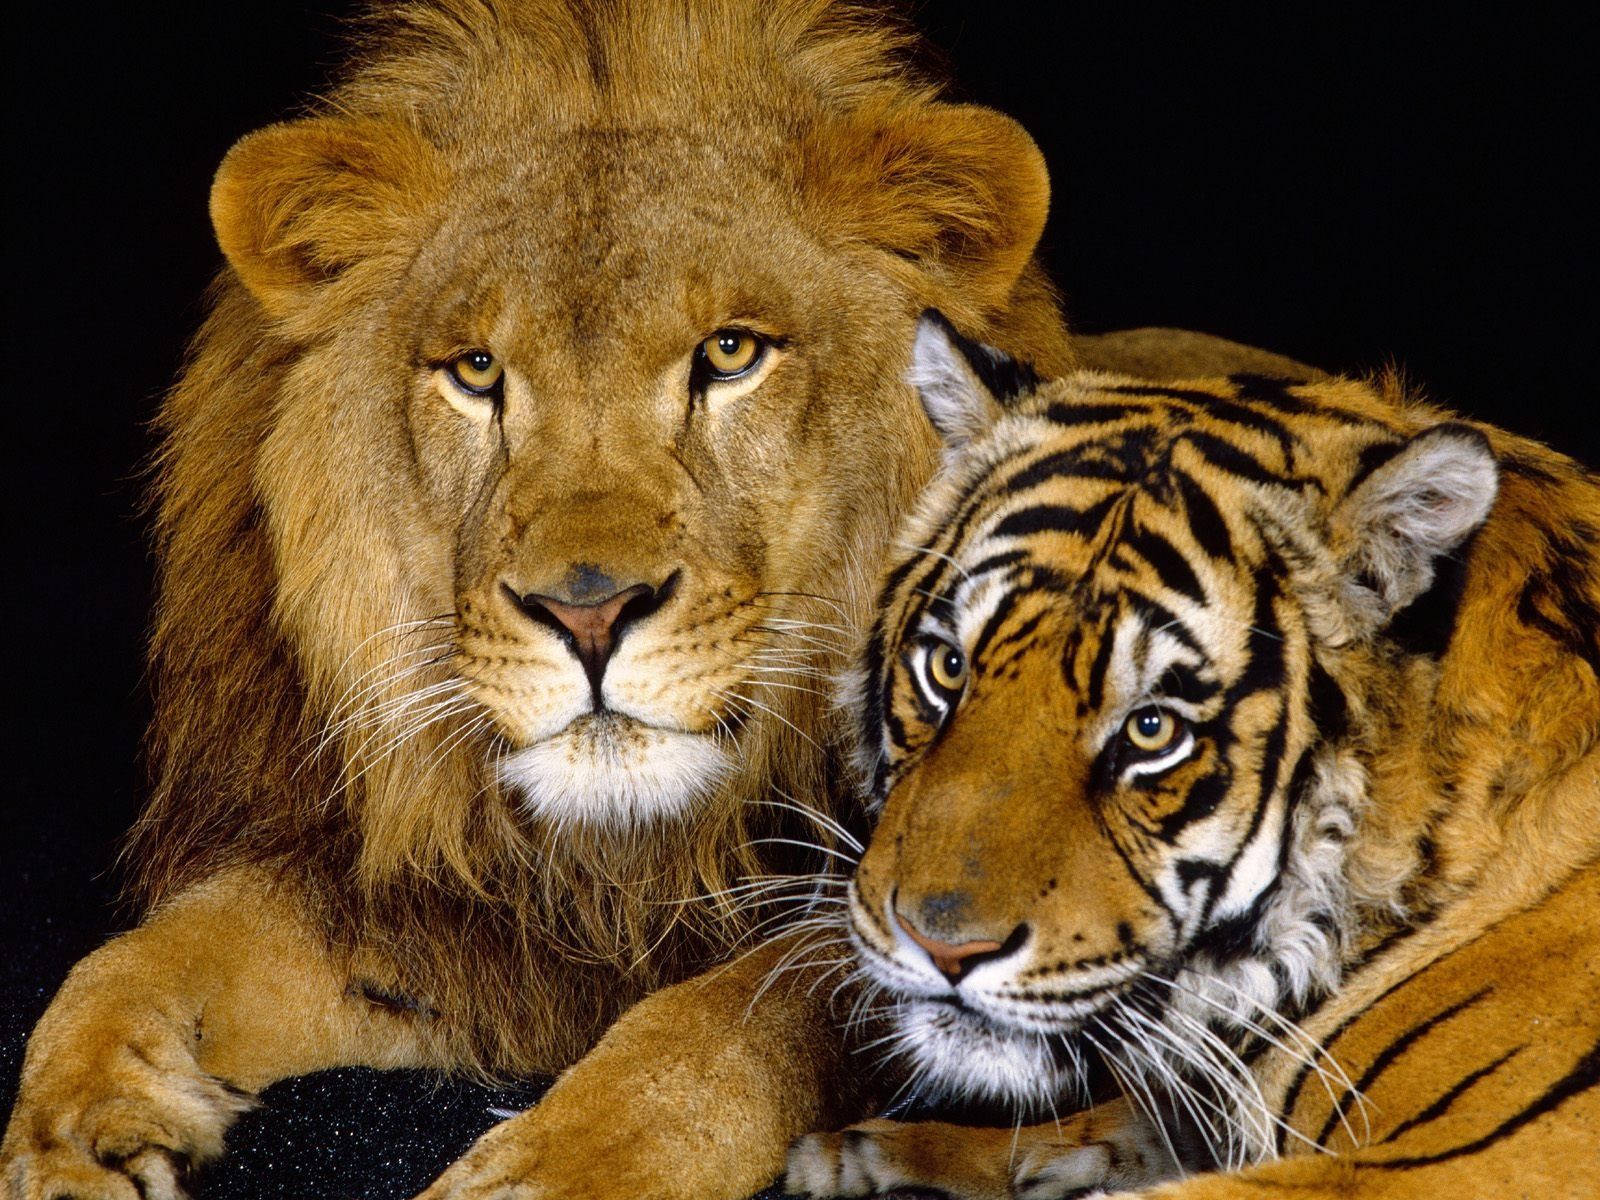 Lion and Tiger wallpaper wallpapers